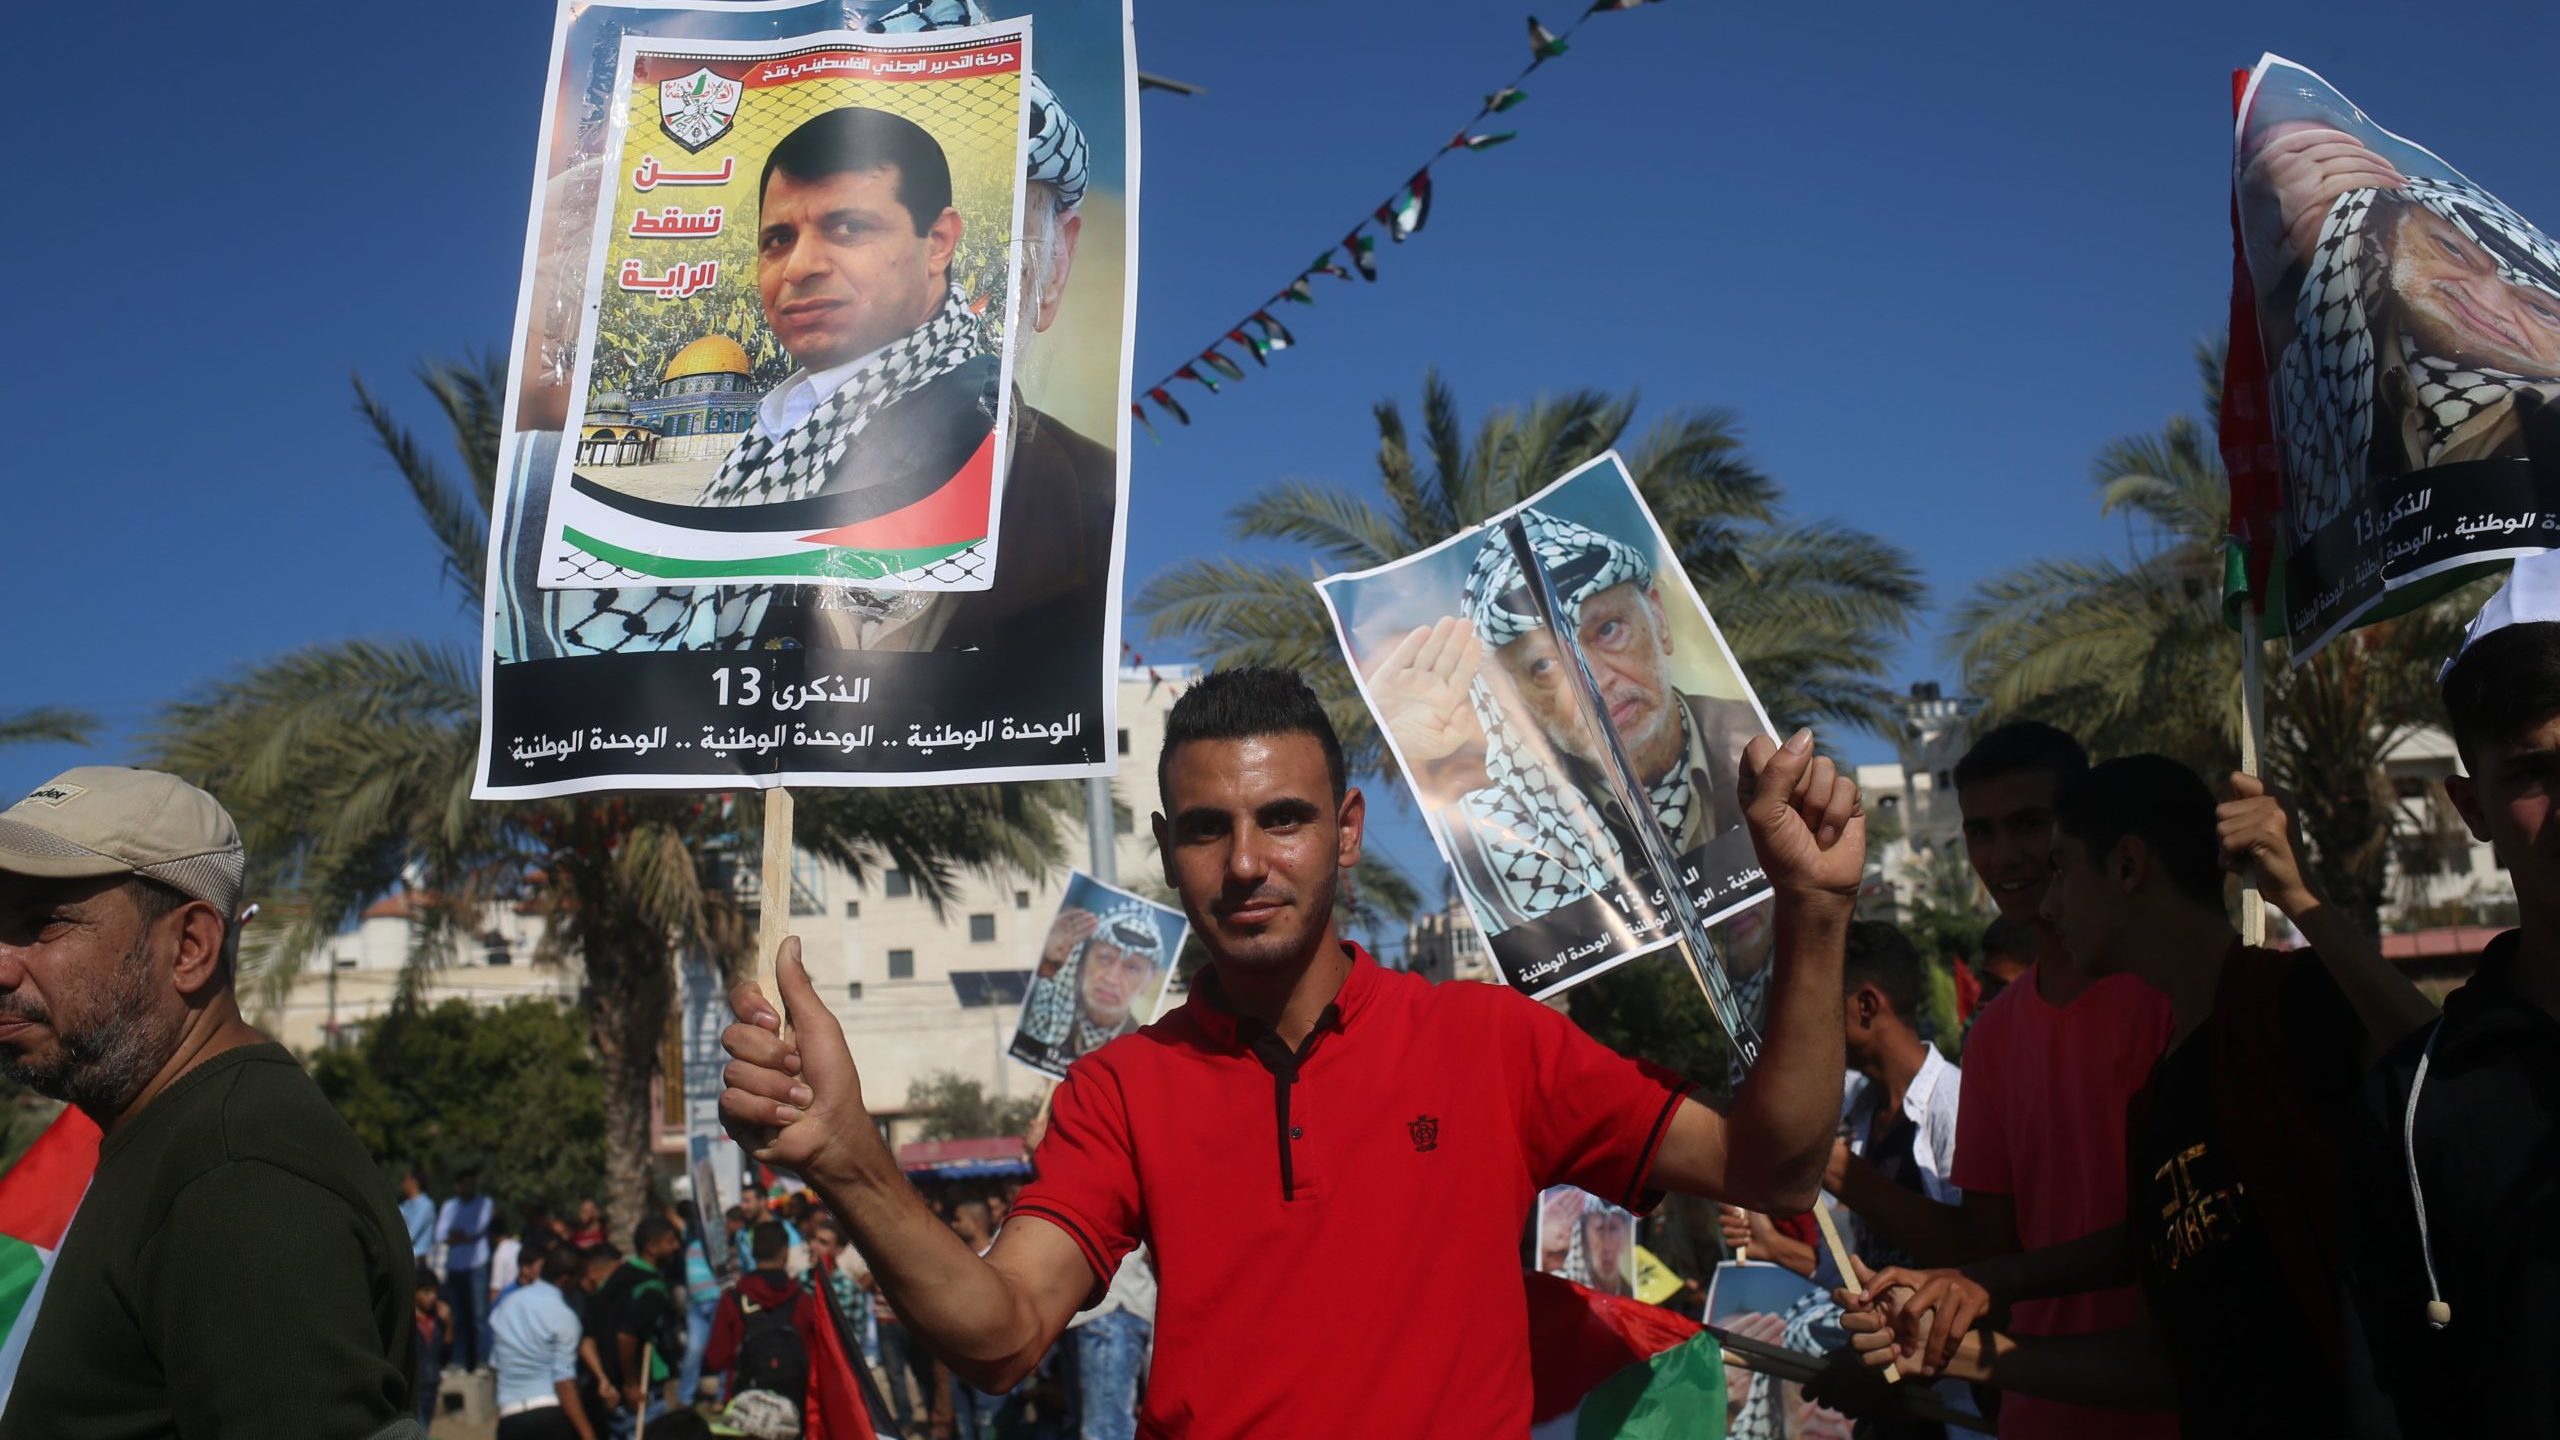 Fatah Members: ‘The Palestinian Street Has Lost Confidence in the Leadership’